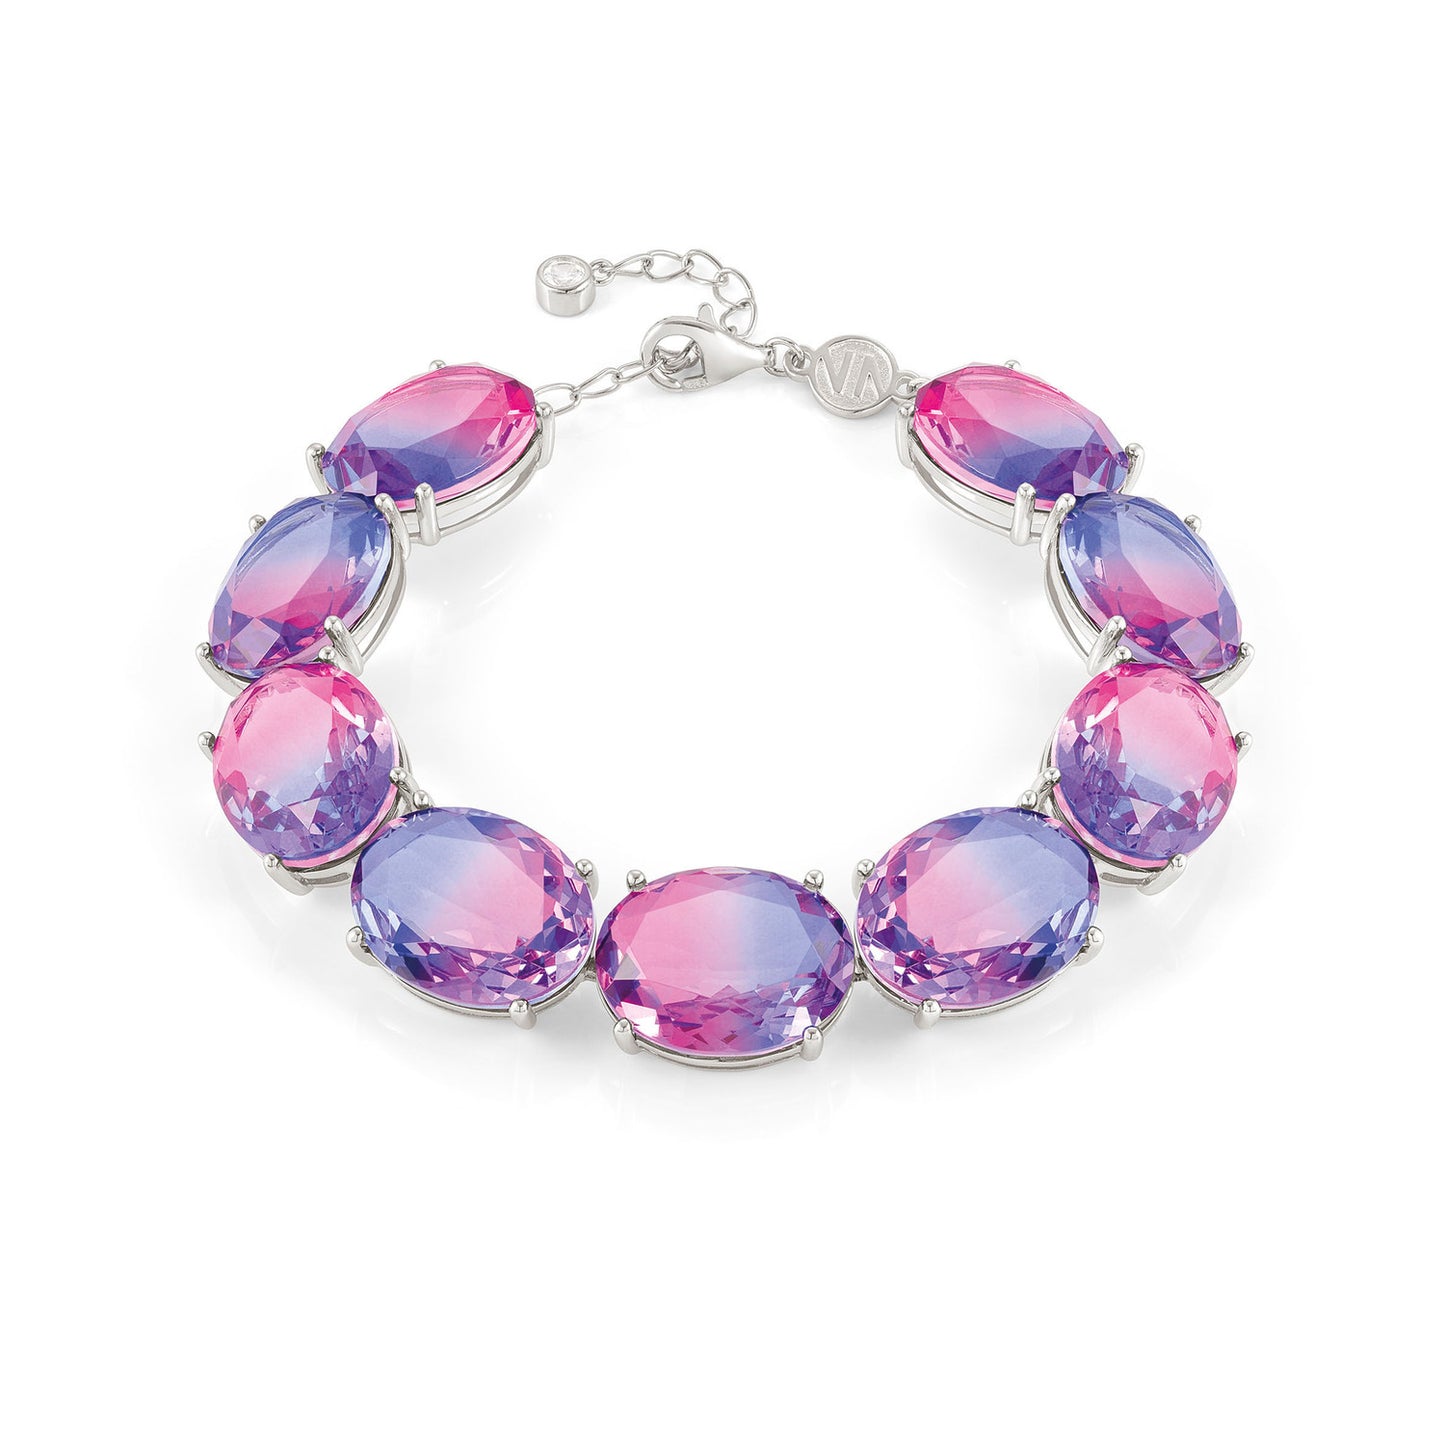 240810/028 SYMBIOSI Sterling Silver Bracelet with BICOLOR stones (LARGE) (028_PINK-PURPLE)